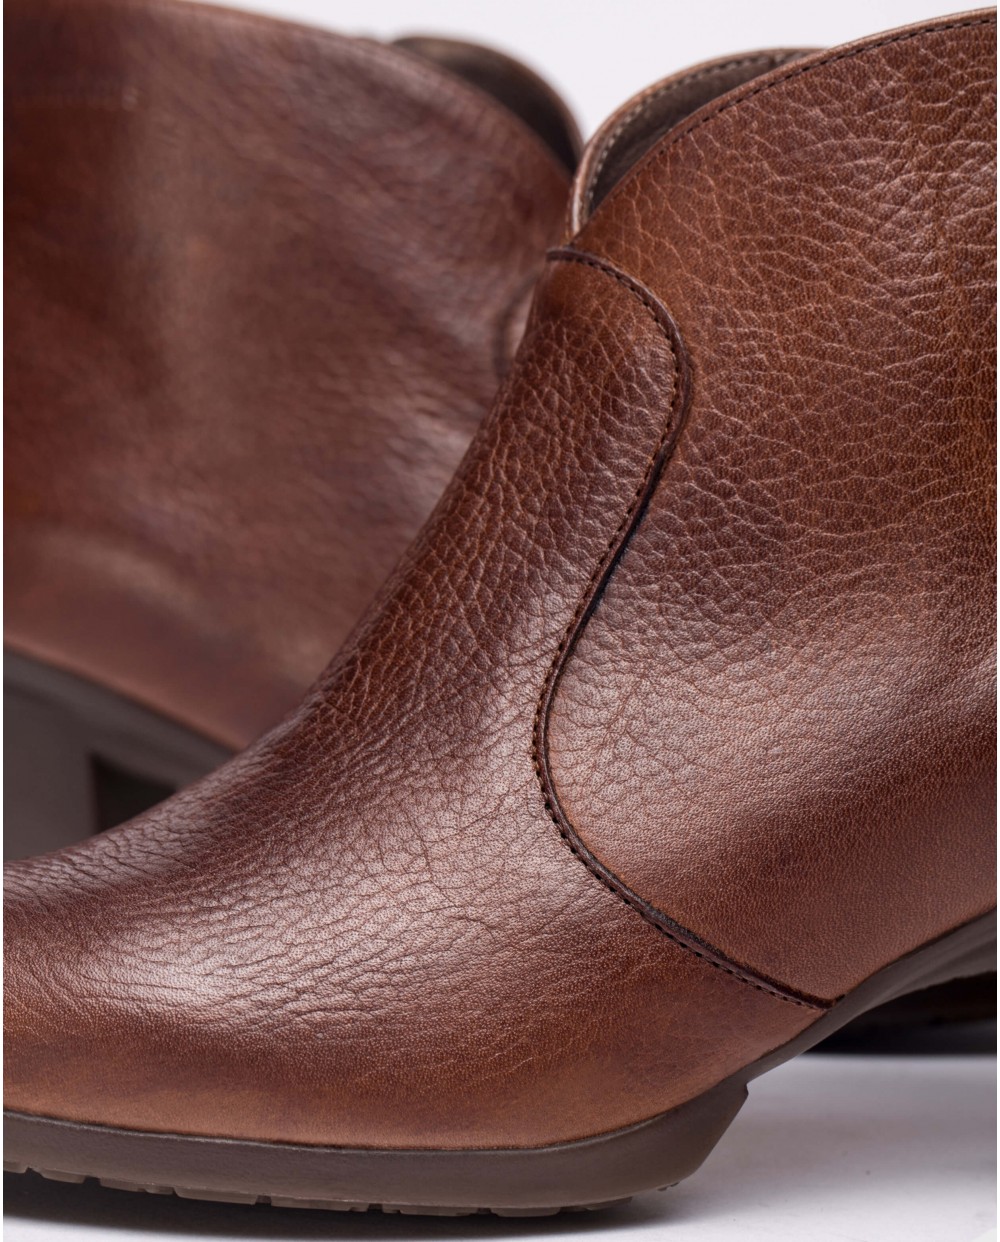 Wonders-Boots-Brown smooth leather ankle boot